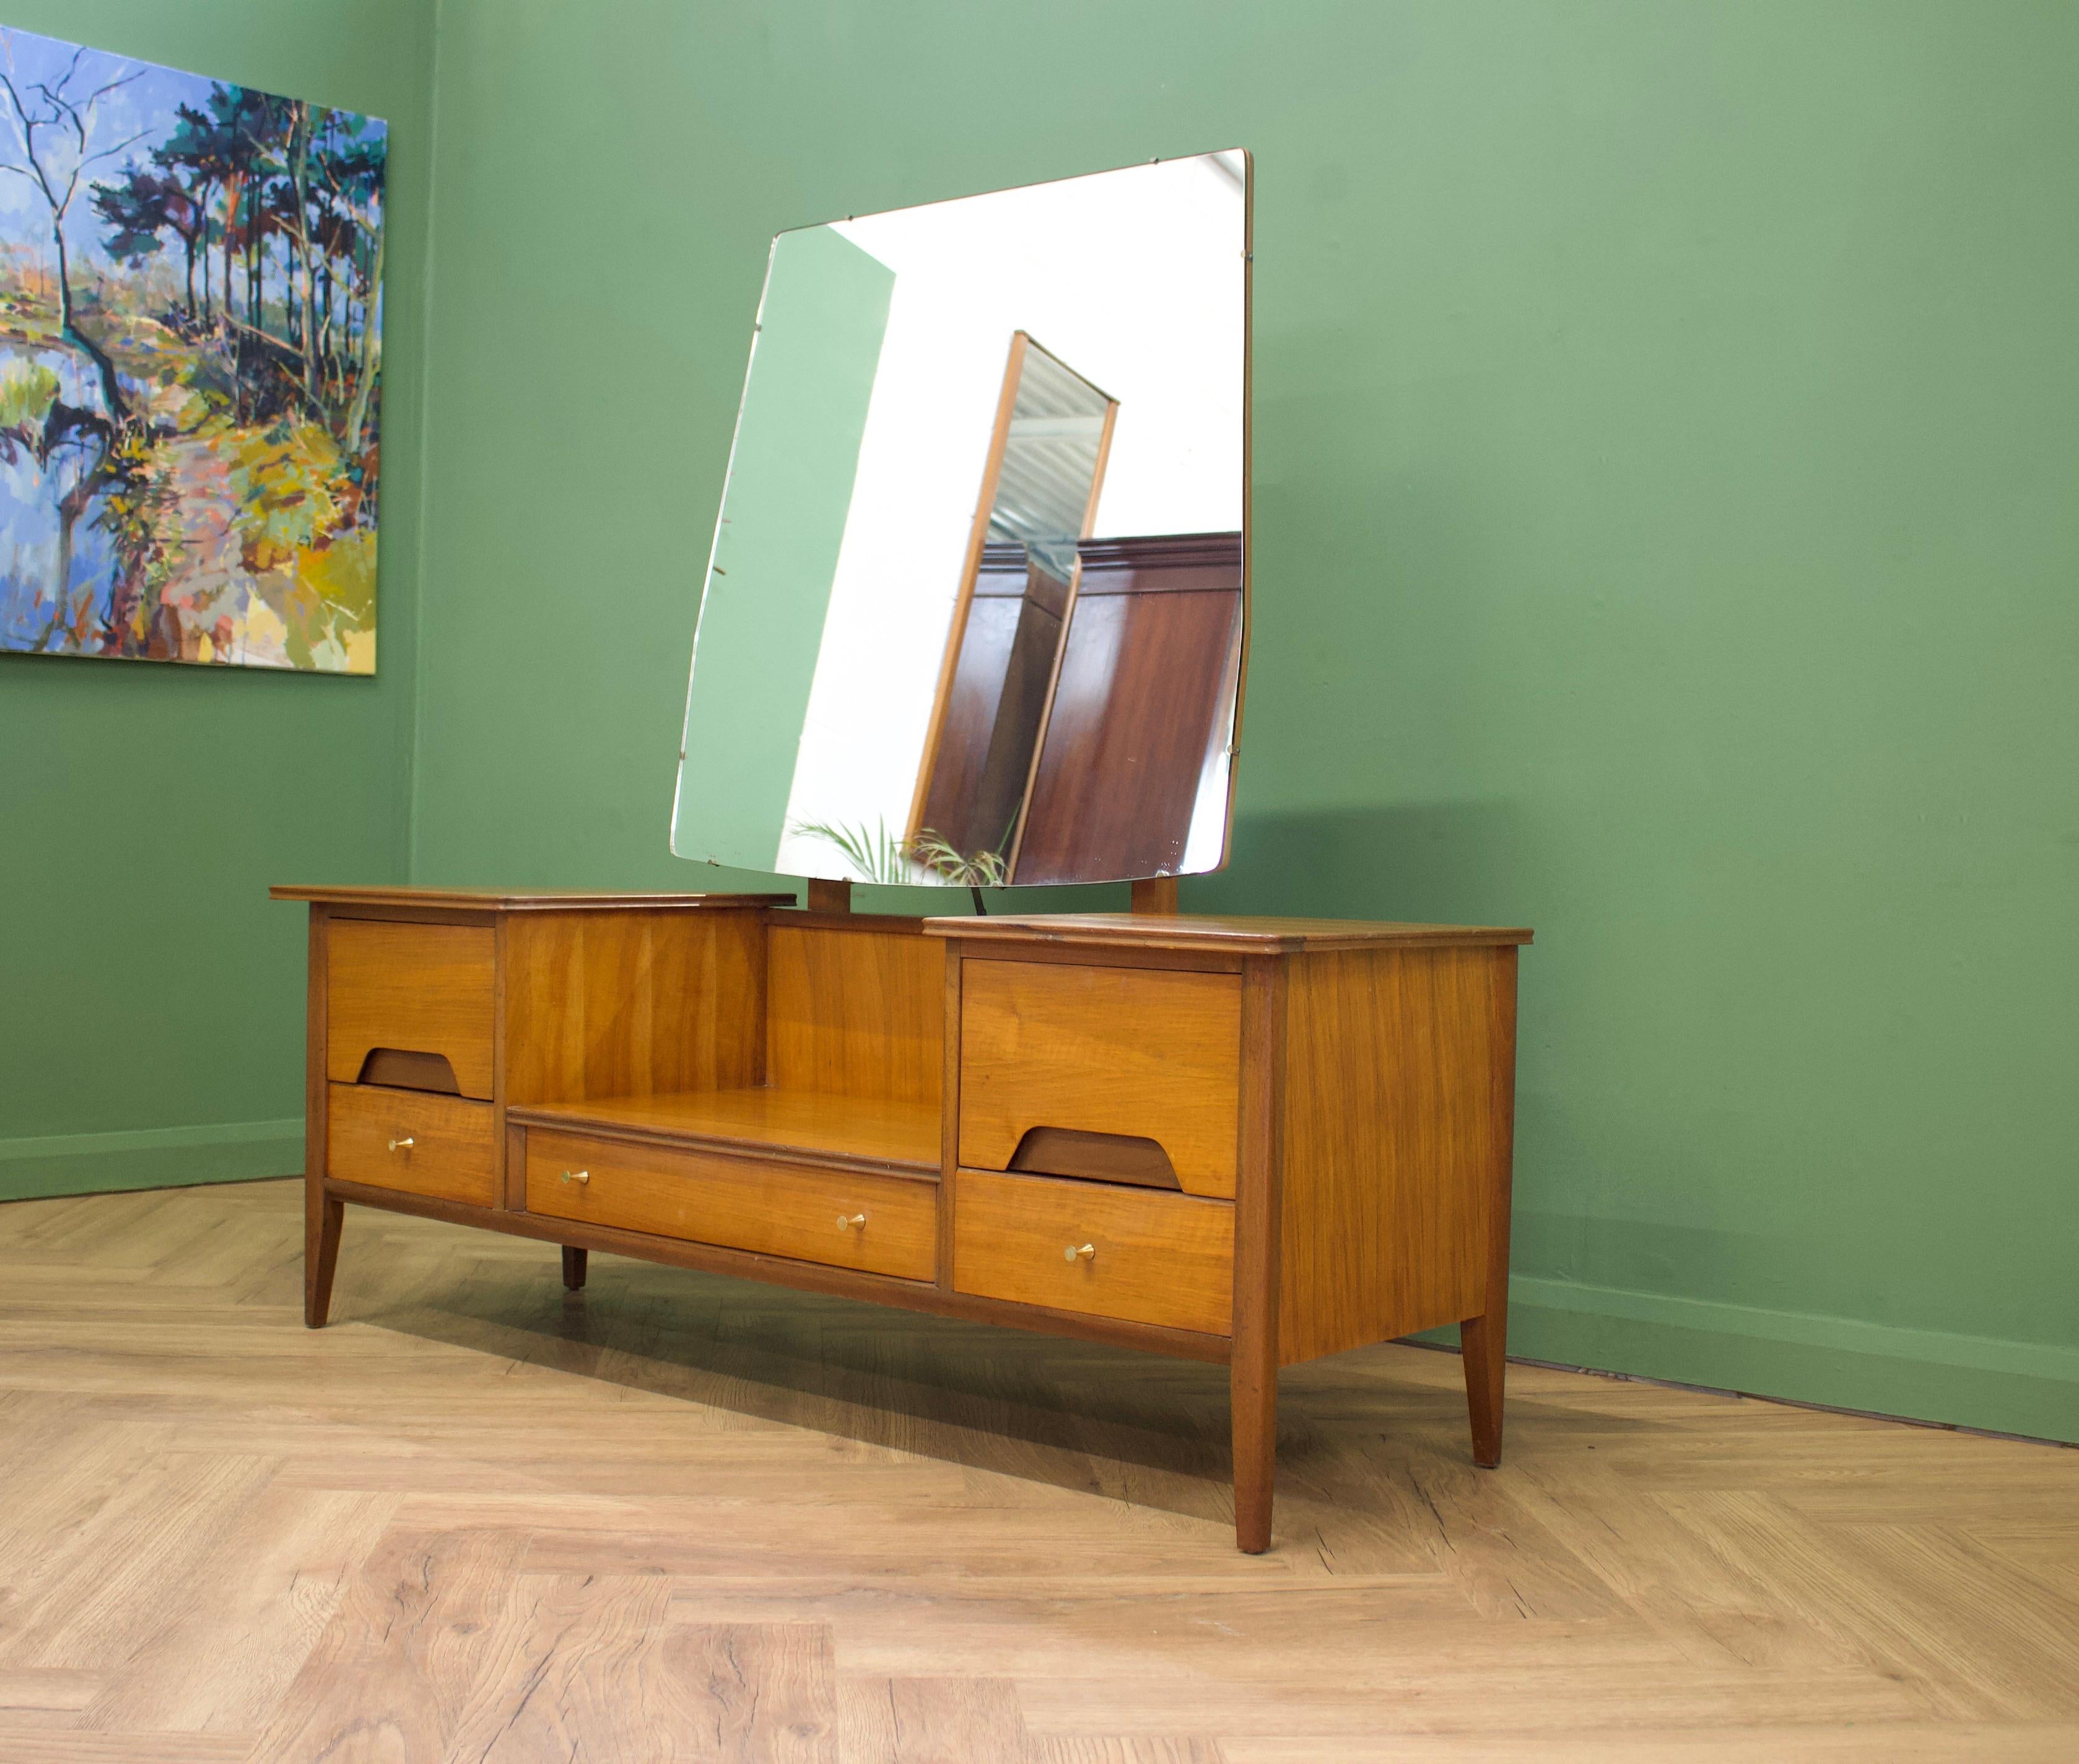 British Midcentury Dressing Table in Walnut from Younger, 1960s For Sale